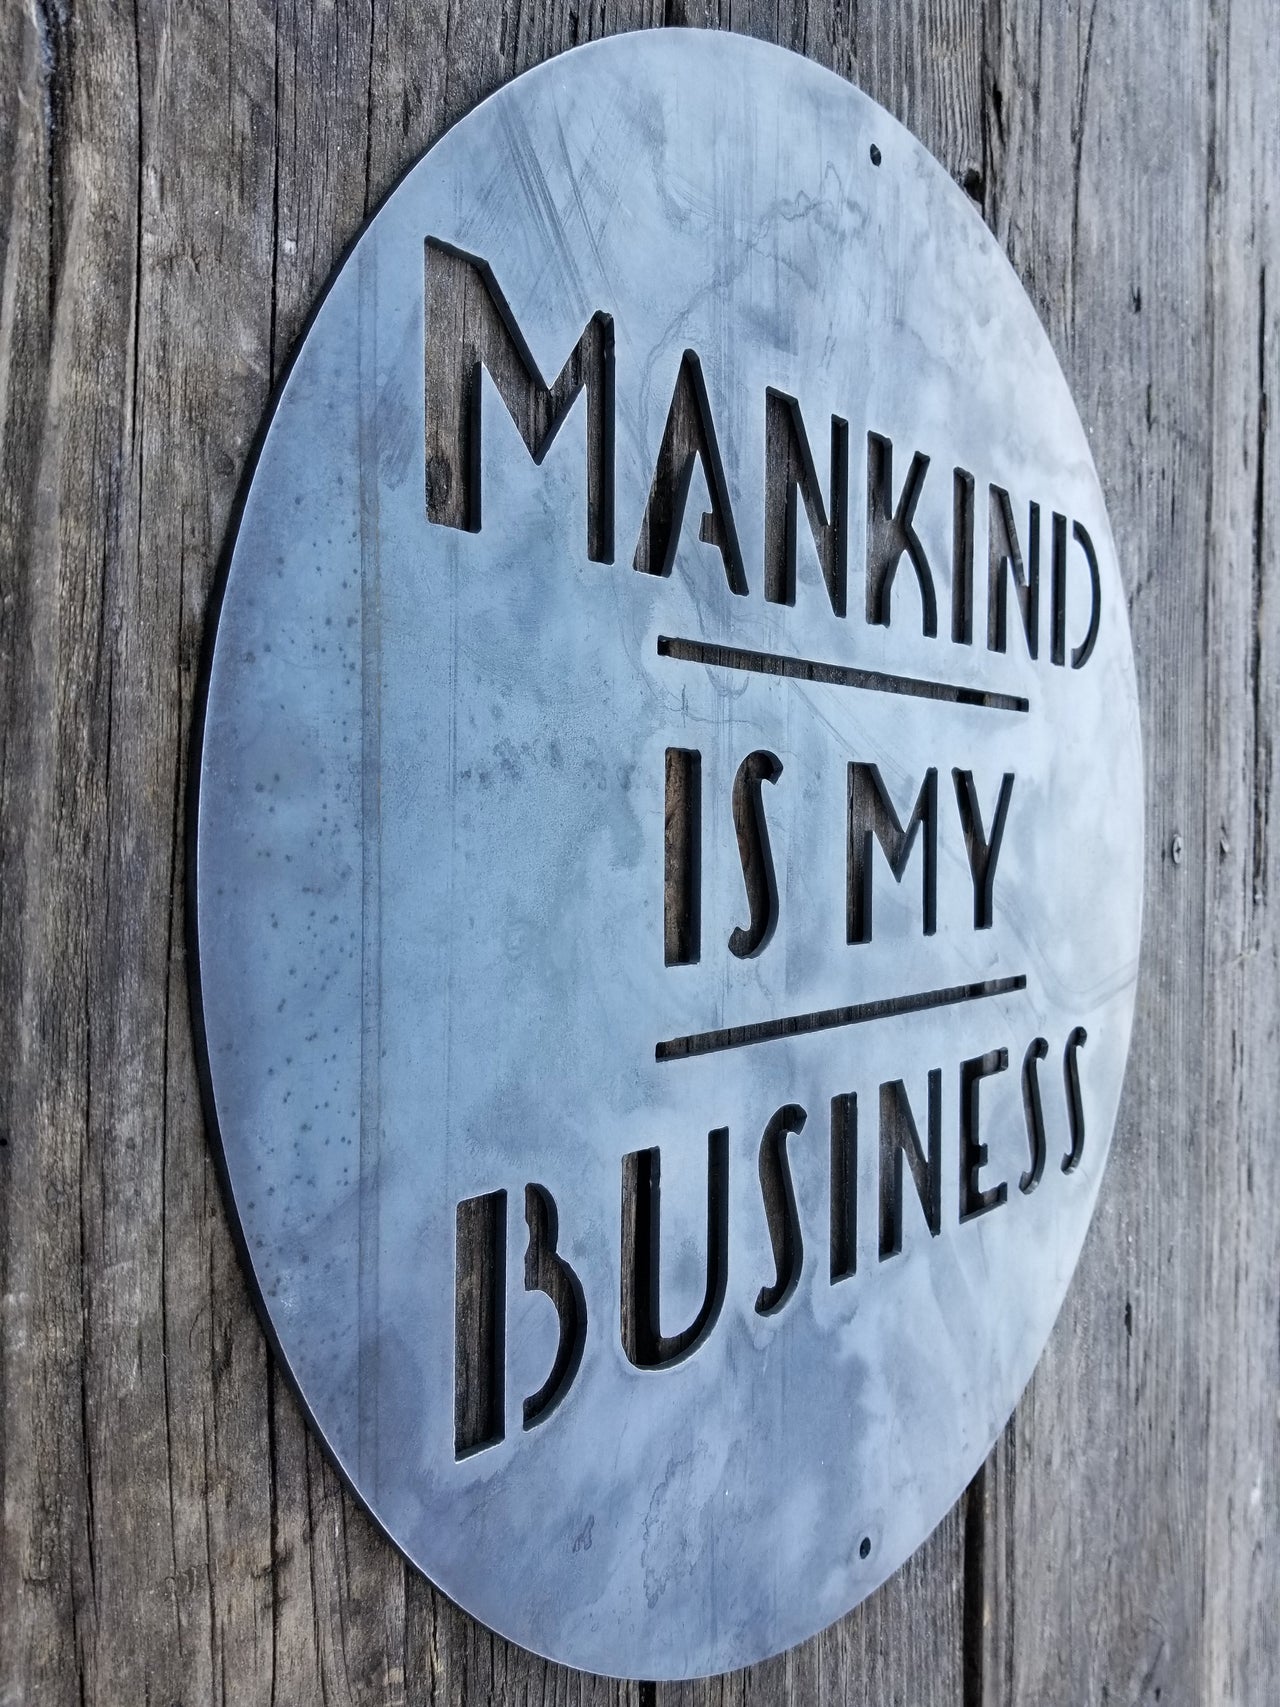 This is a round art deco sign that has three lines of text with a straight line seperating them. The sign reads, "Mankind Is My Business"